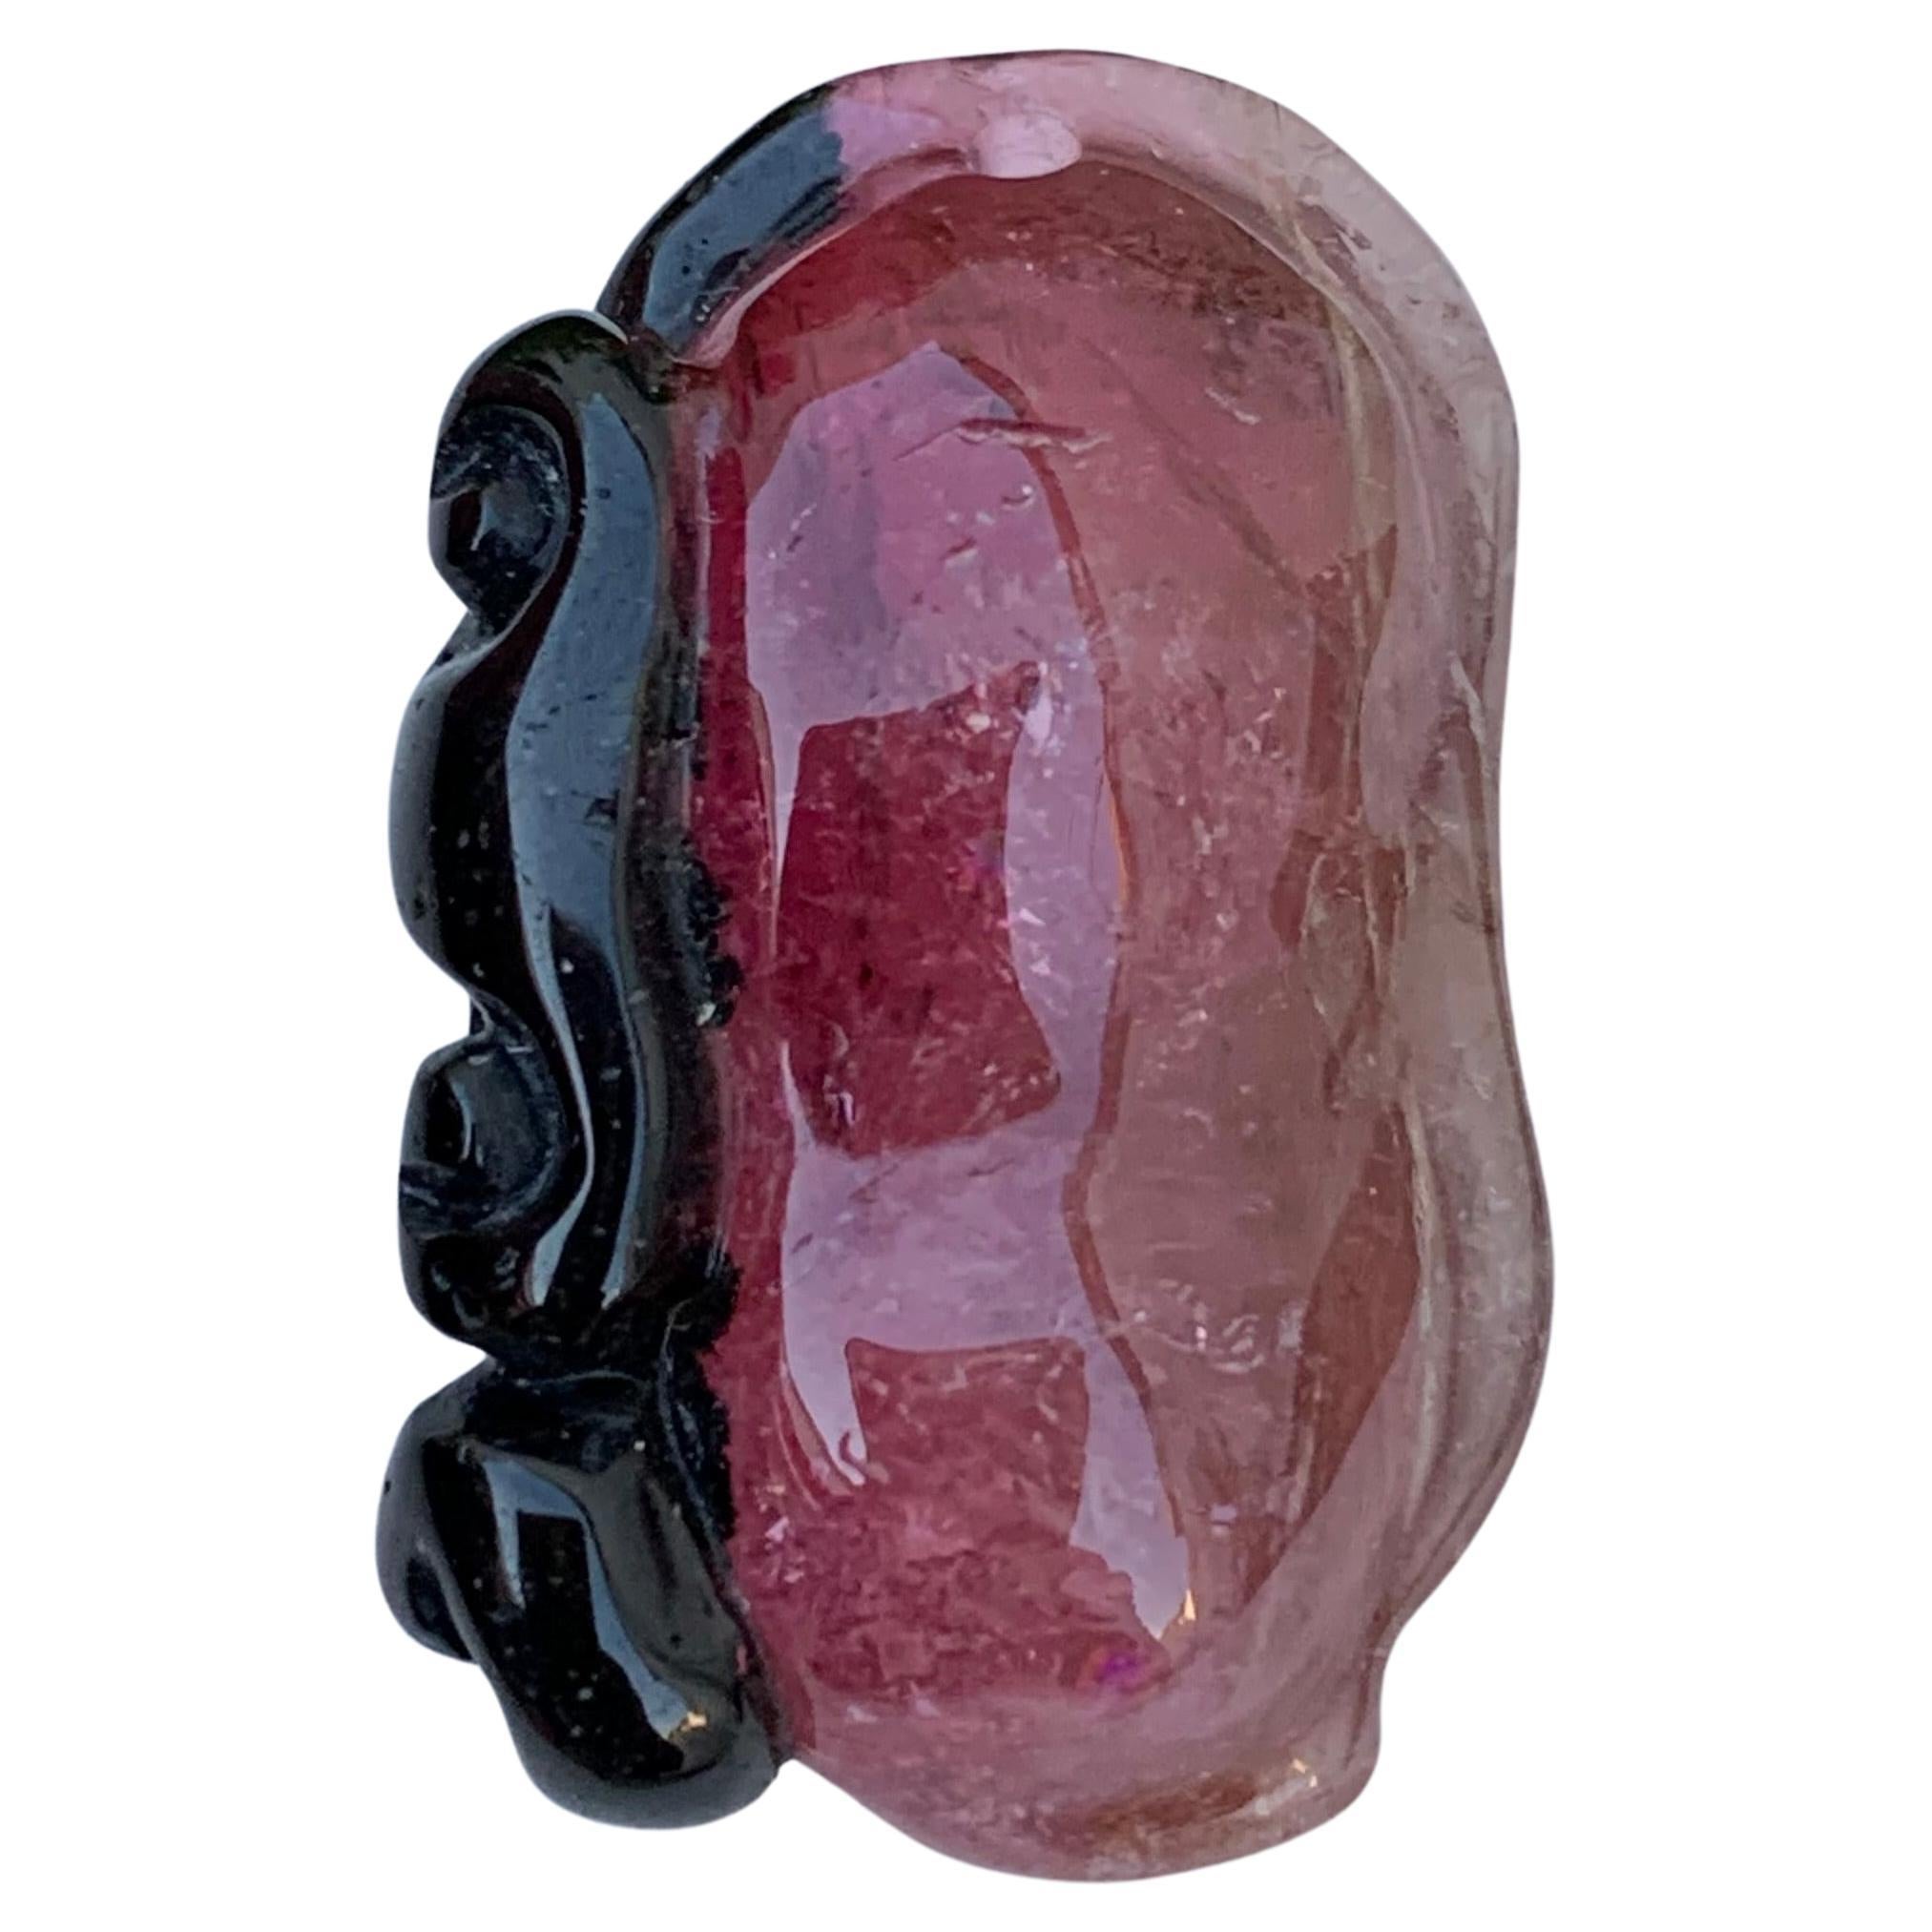 26.70 Carat Fruit Shape Bi Colour Tourmaline Drilled Carving From Africa  For Sale